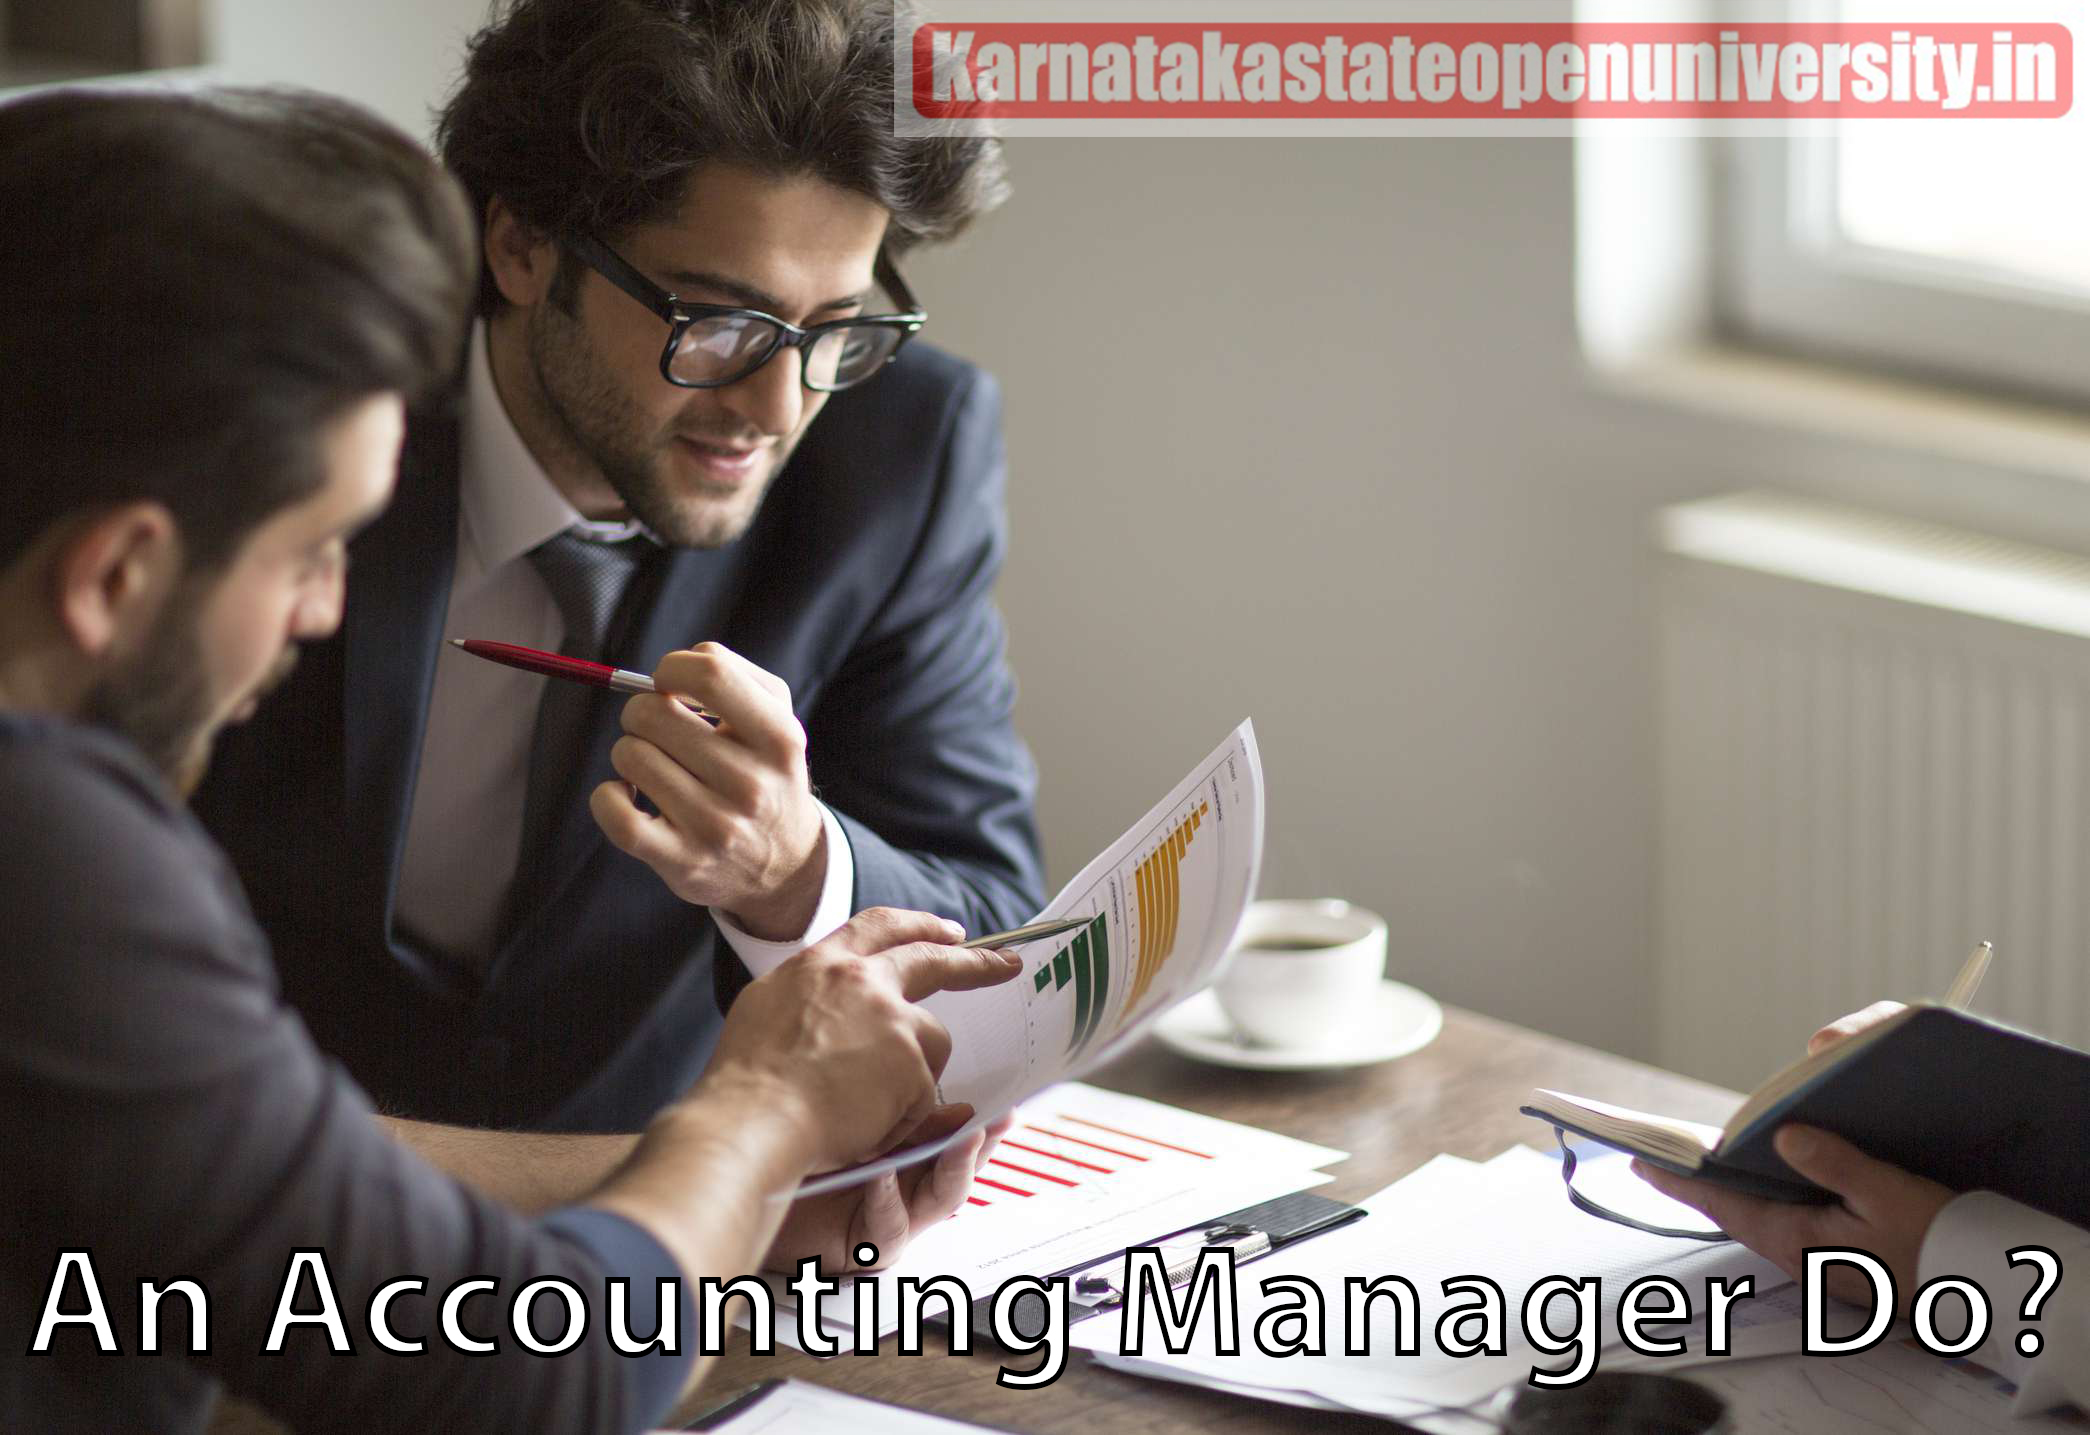 What Does An Accounting Manager Do?